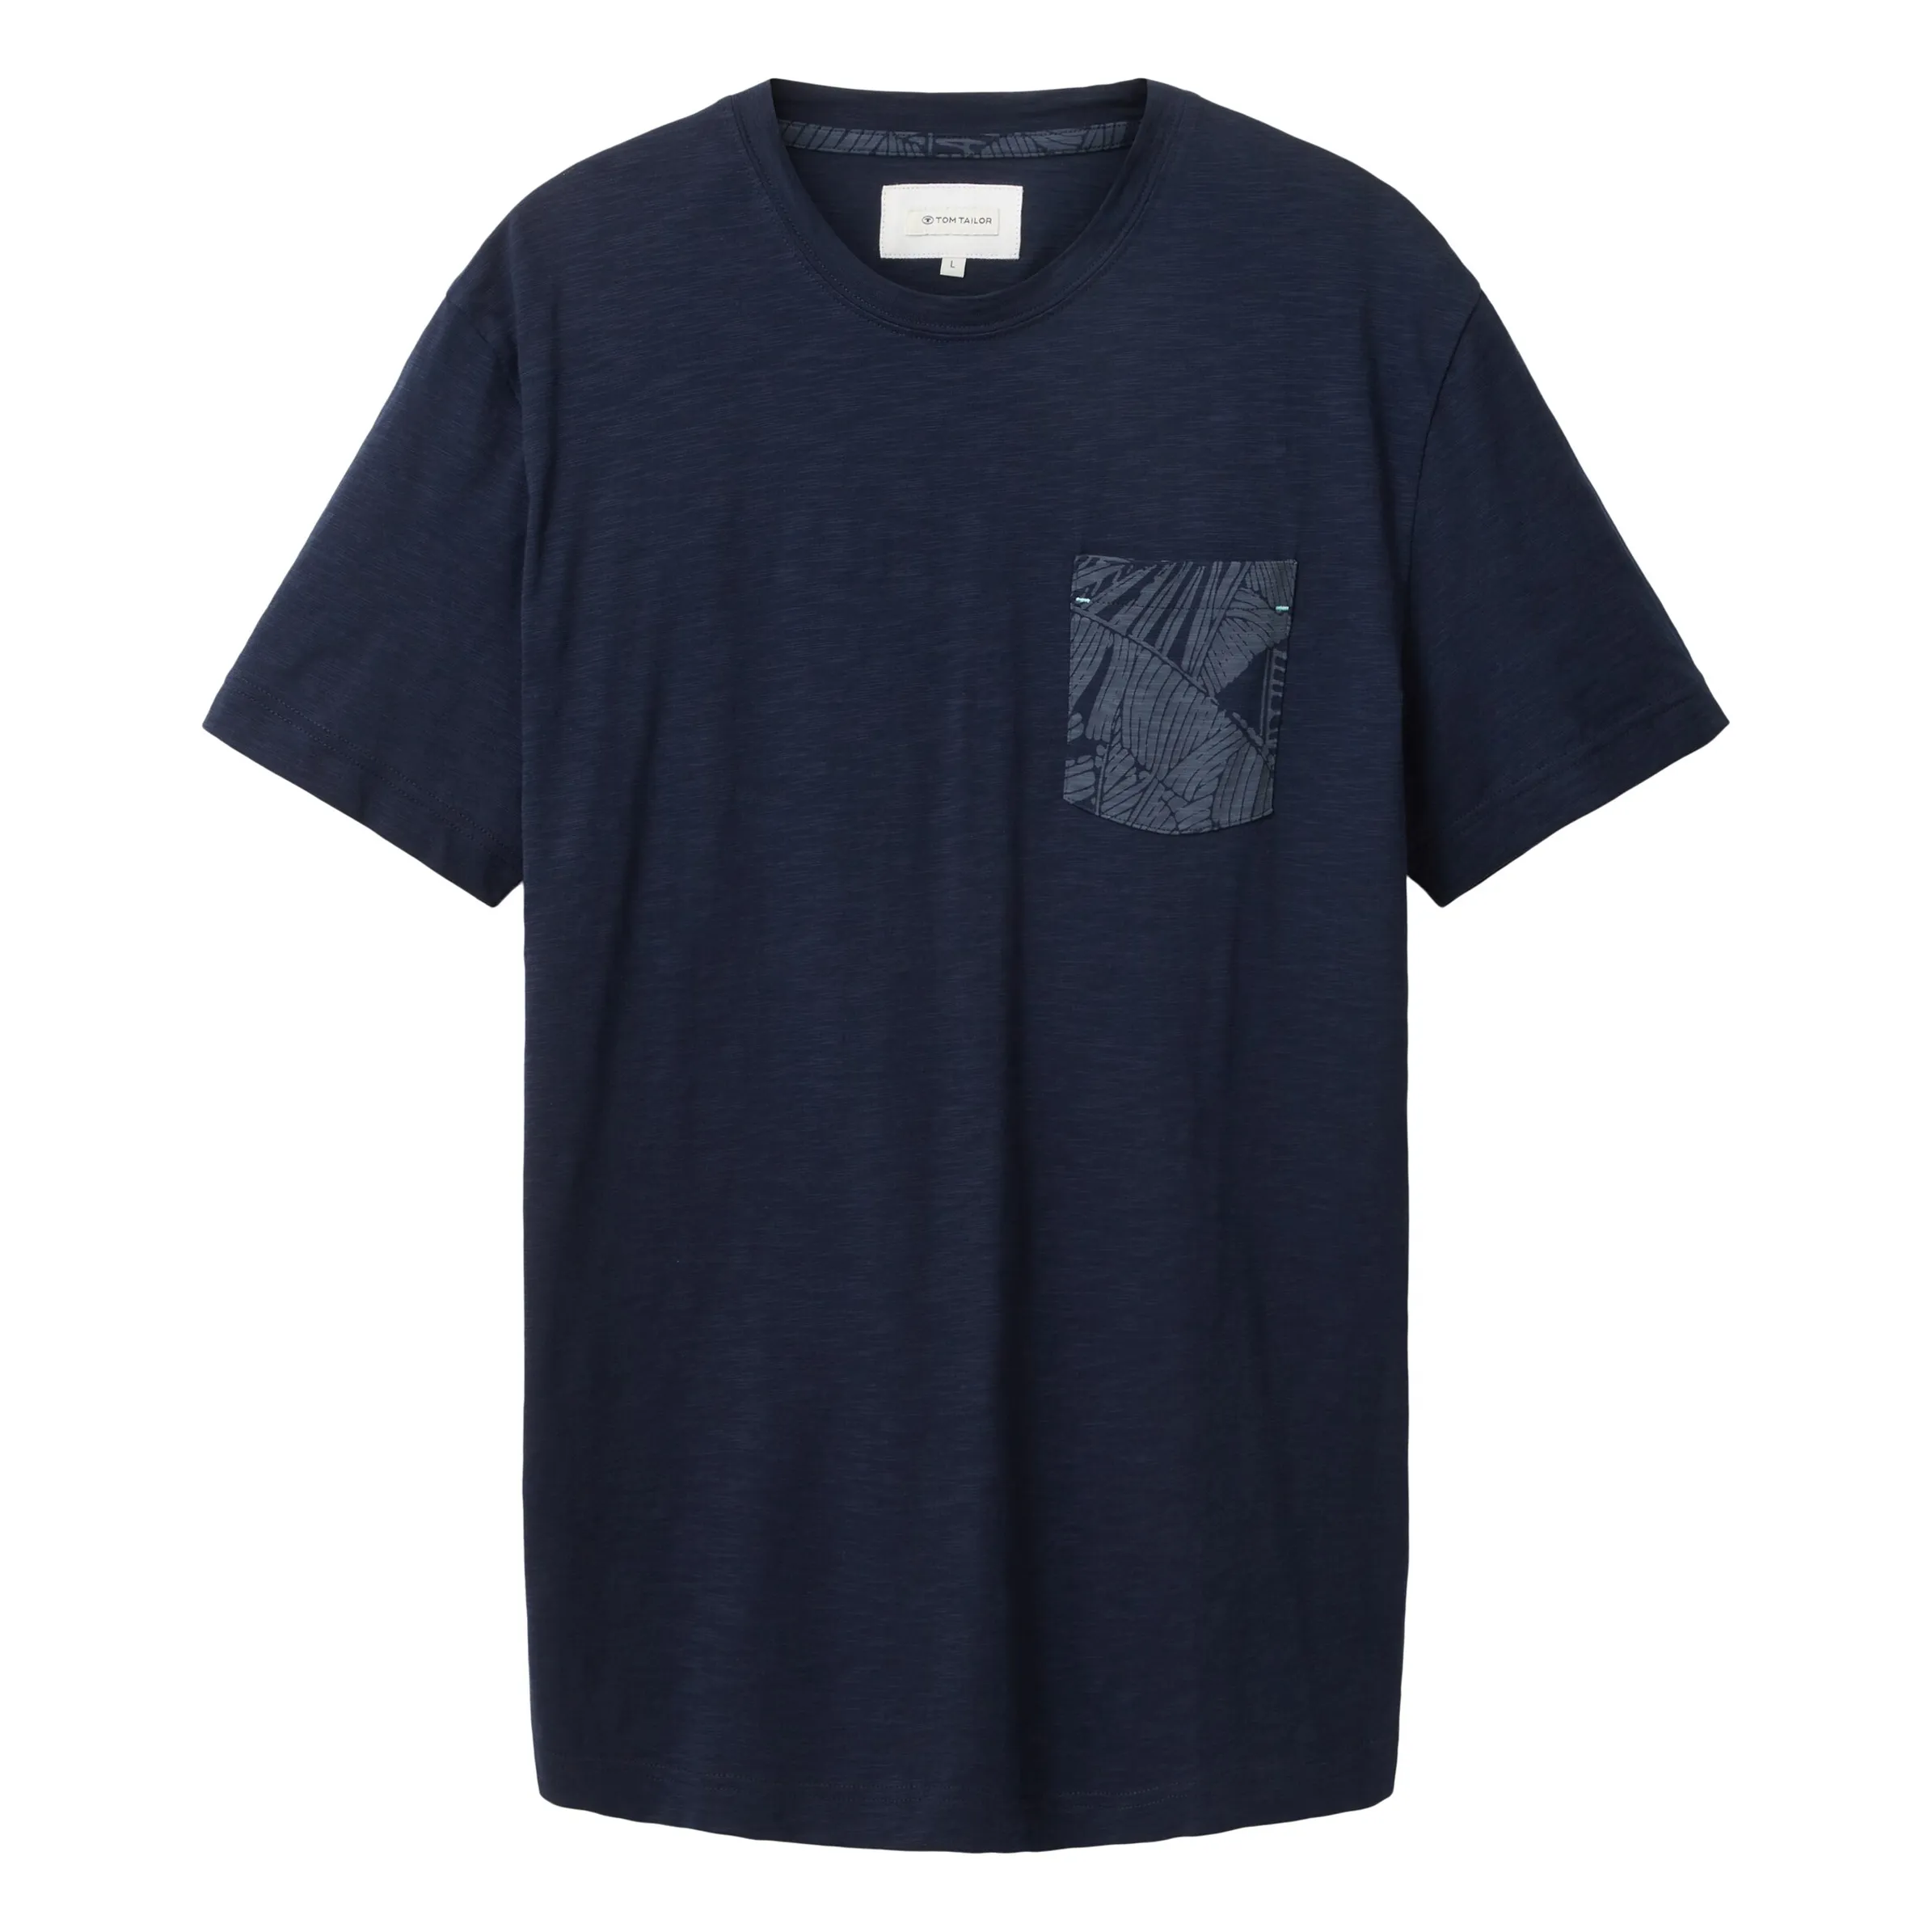 Tom Tailor 1036371 structured t-shirt with pocket Blau 880571 10668 1